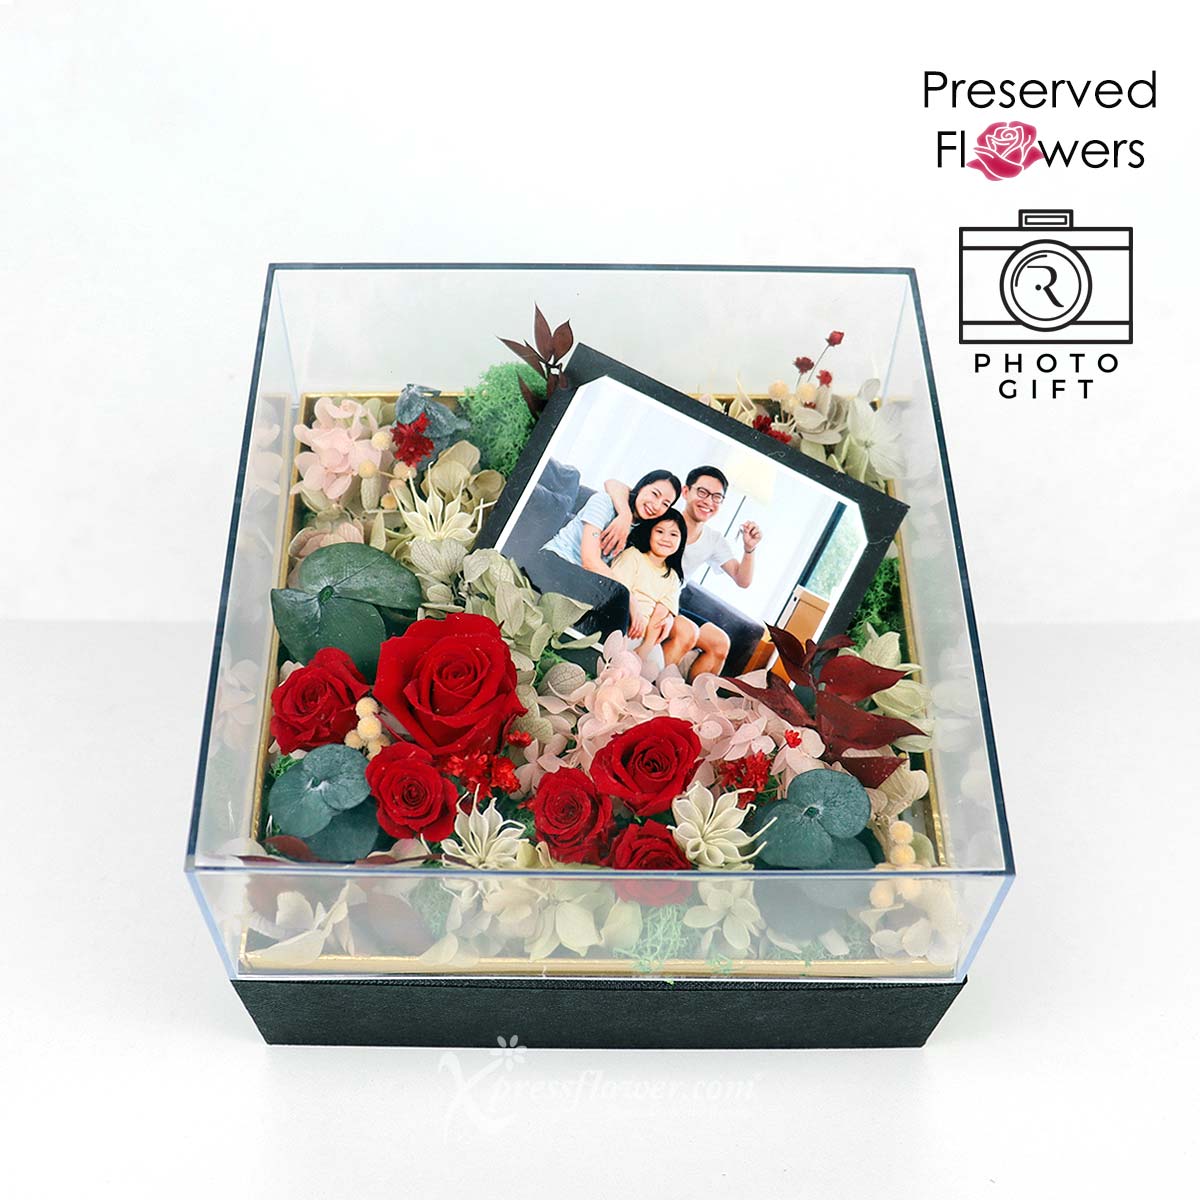 Magical Petals (Preserved Flowers with personalised photo and LED lights)